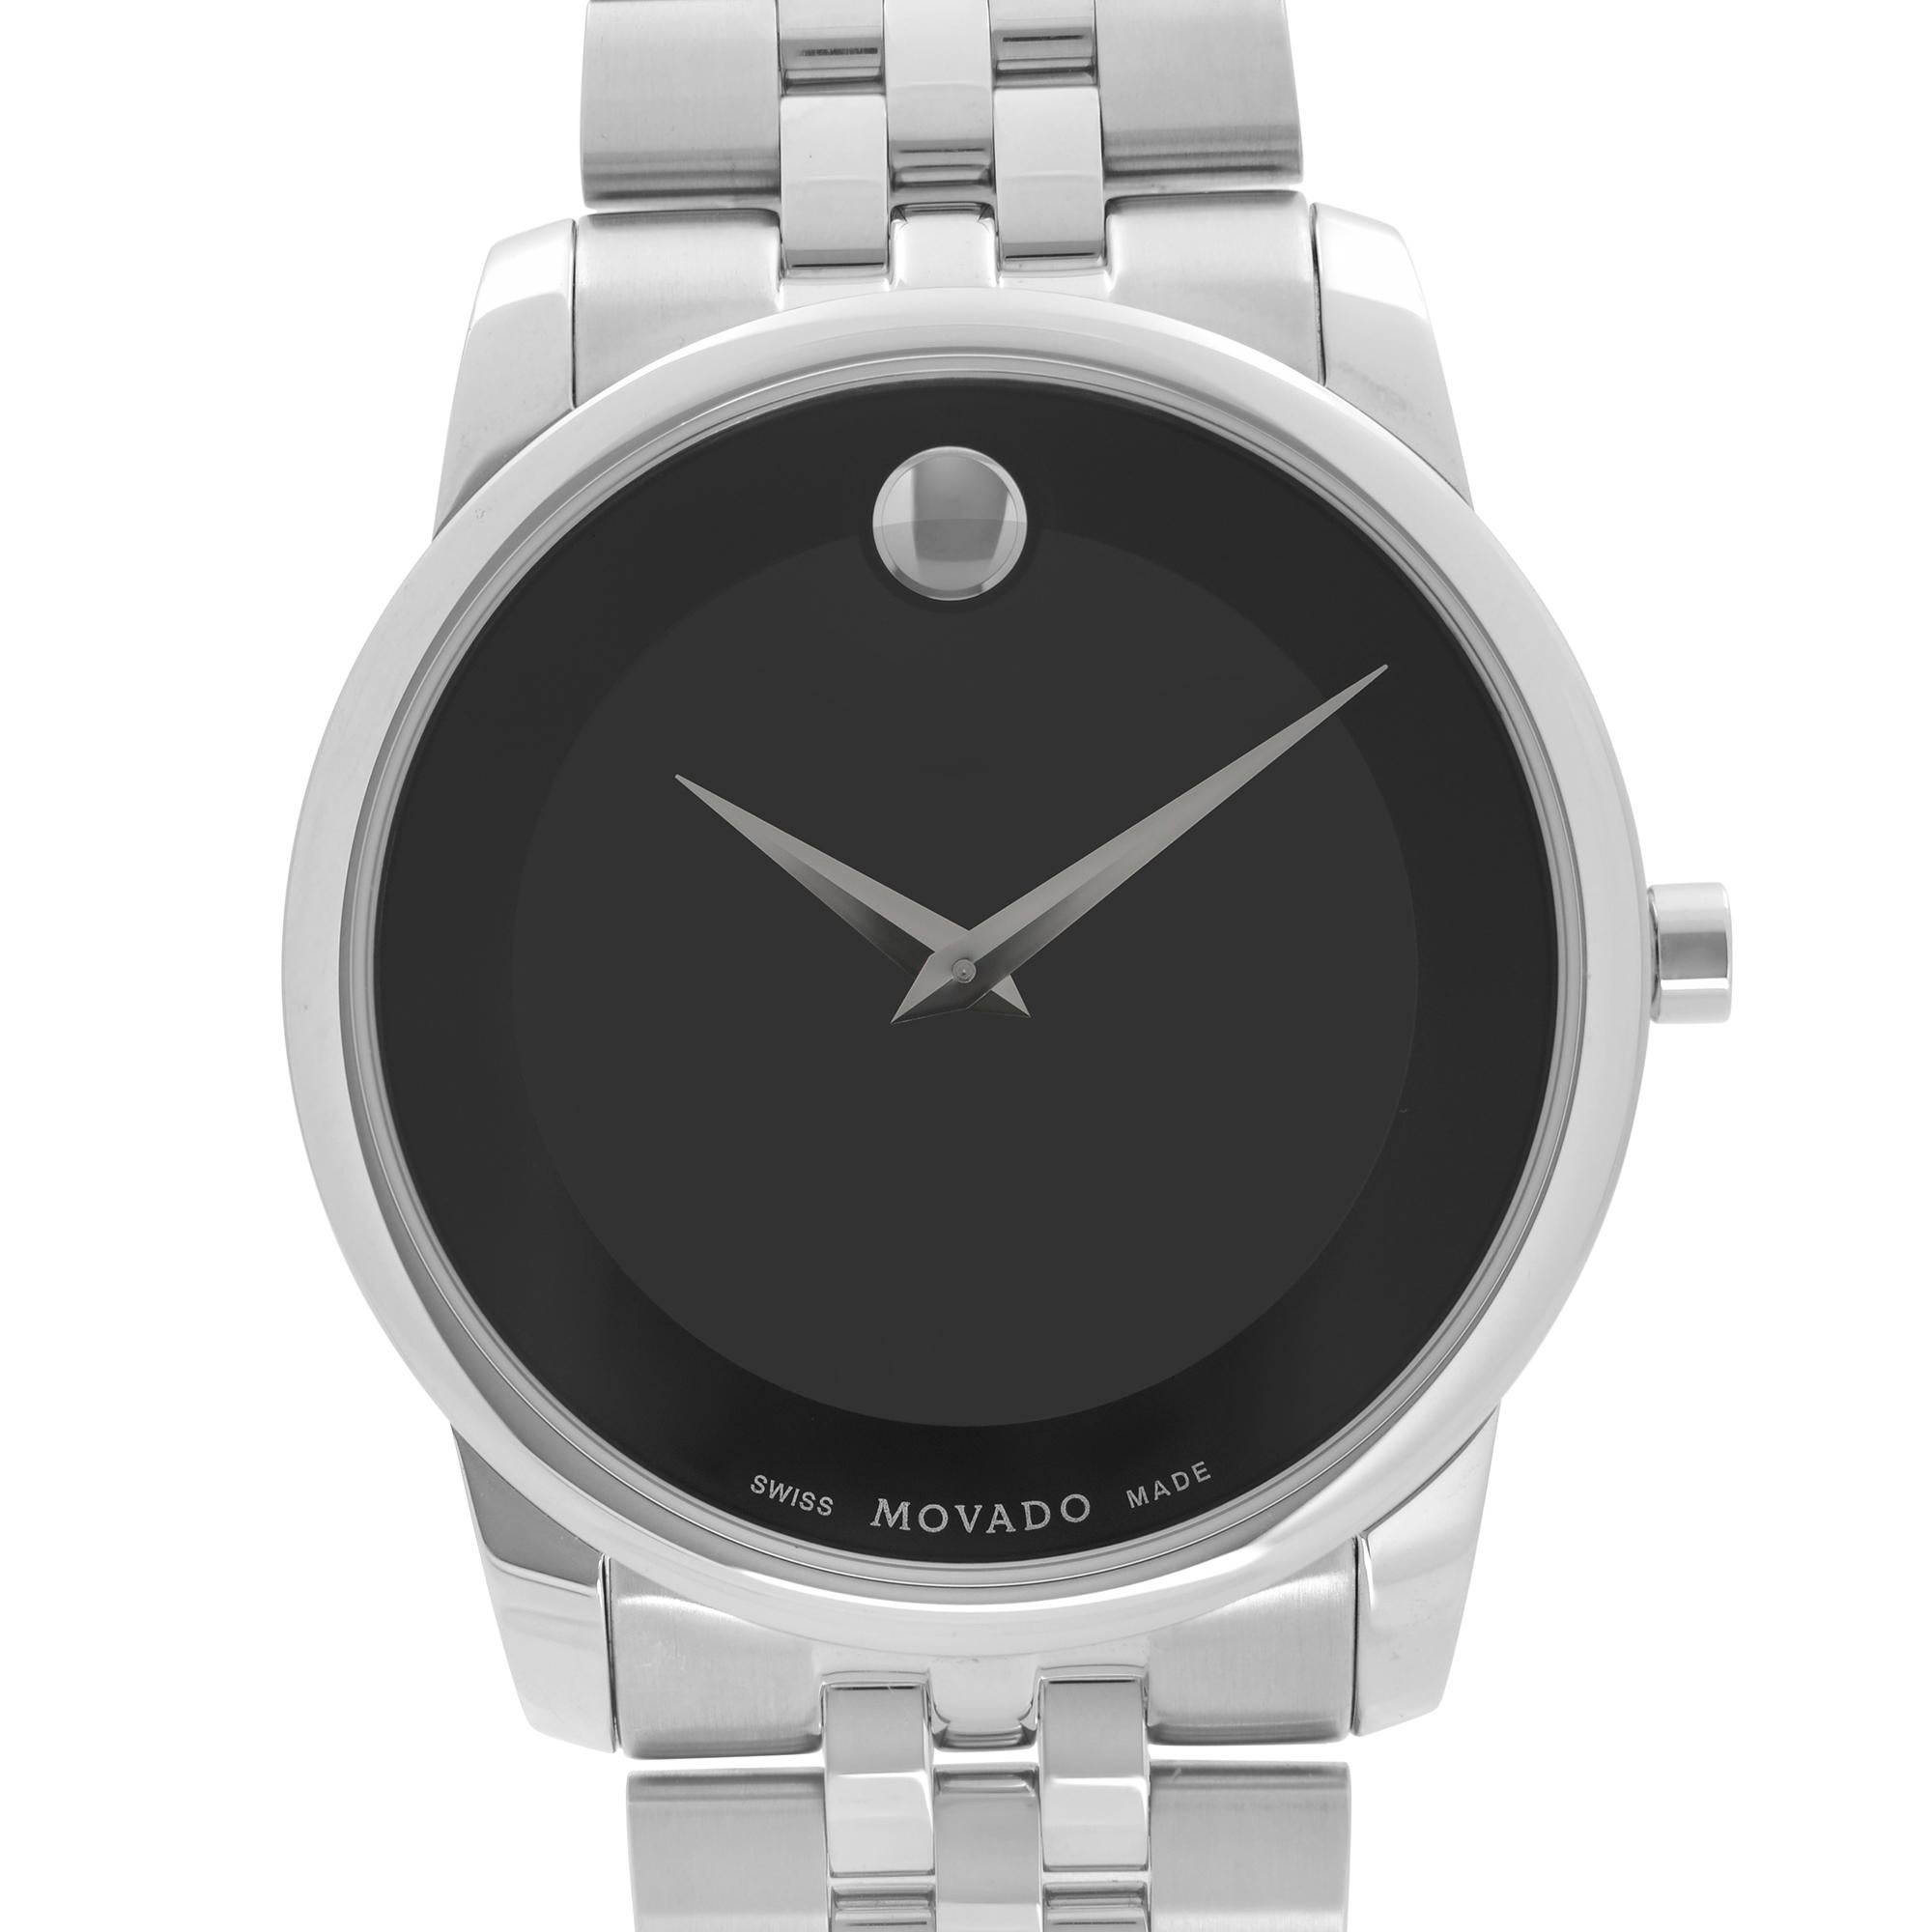 Display Model Movado Black Museum Dial Stainless Steel Men's Watch 0606504. This Beautiful Timepiece Features:  Stainless Steel Case with Stainless Steel Bracelet, Fixed Stainless Steel Bezel, Black Dial with Stainless Steel Hands, And a Marker at